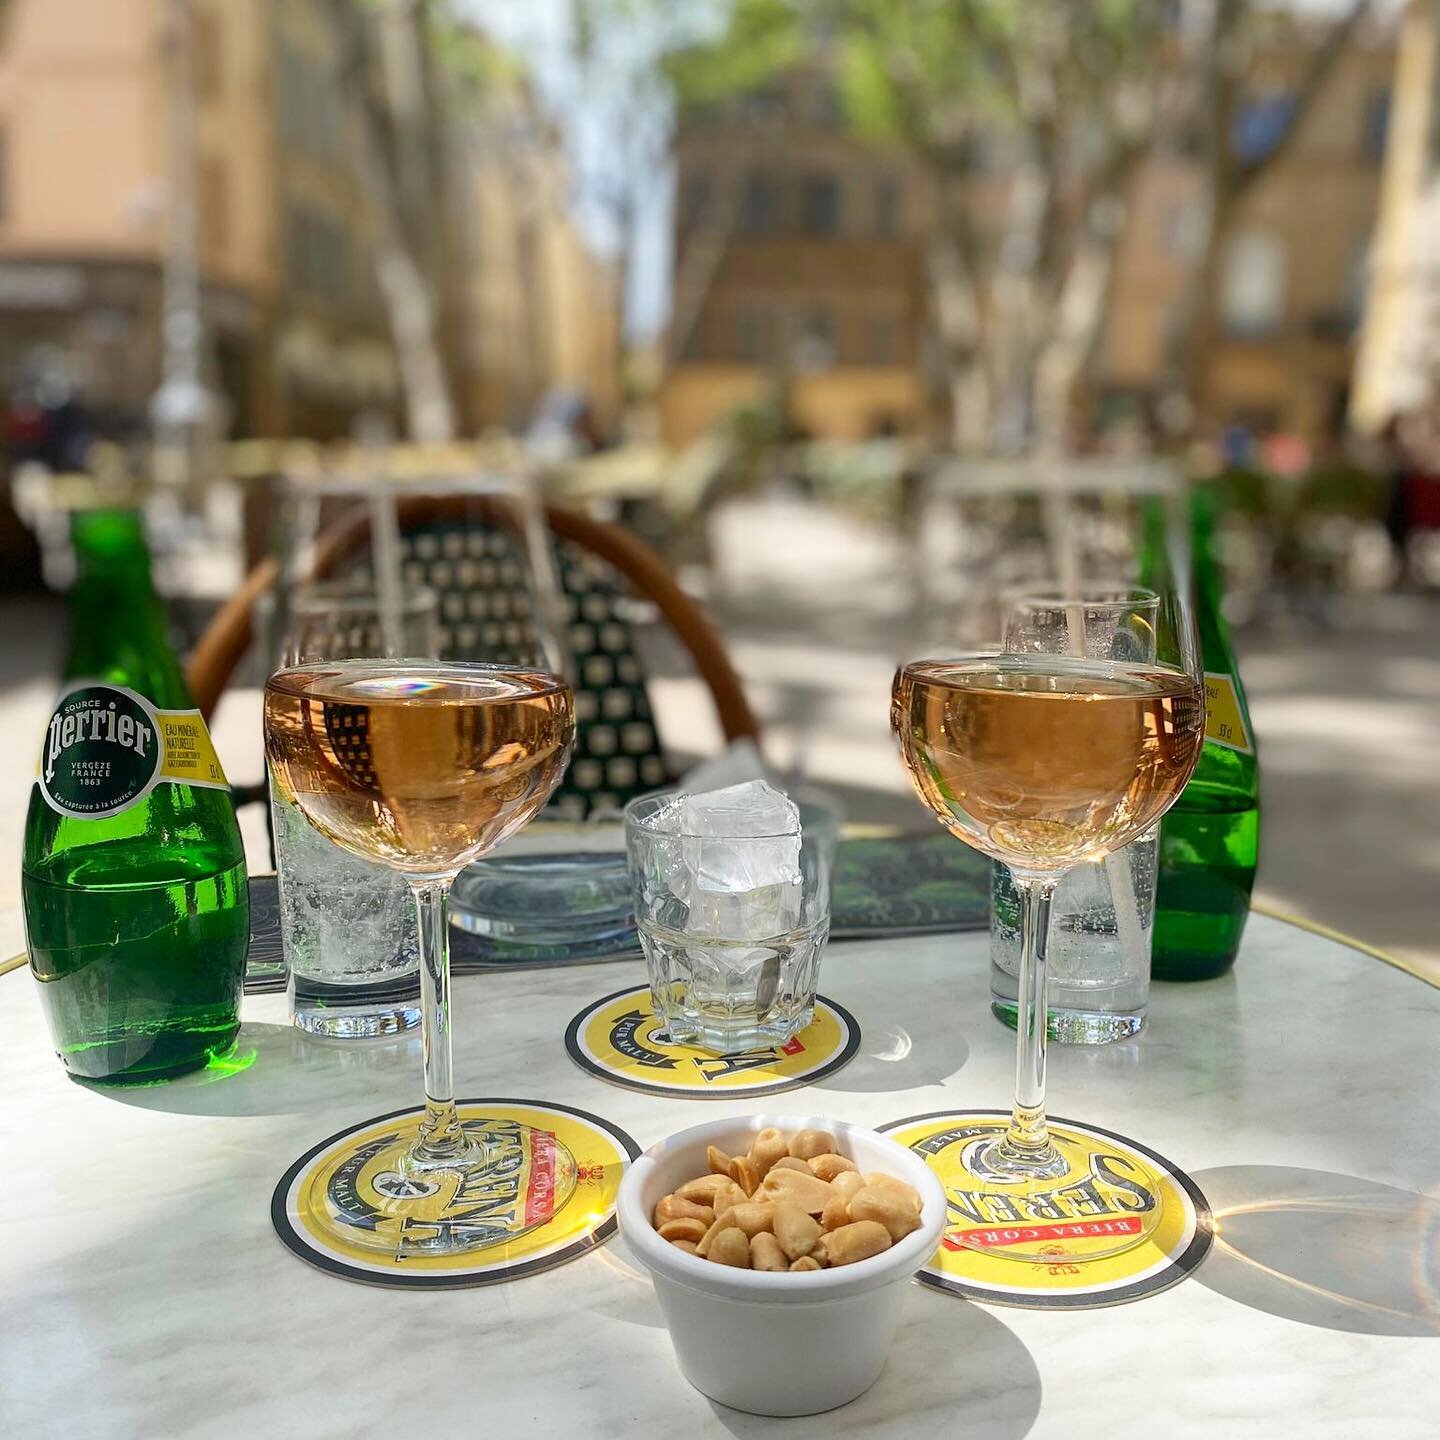 nice lil monday in #aixenprovence #france 🇫🇷